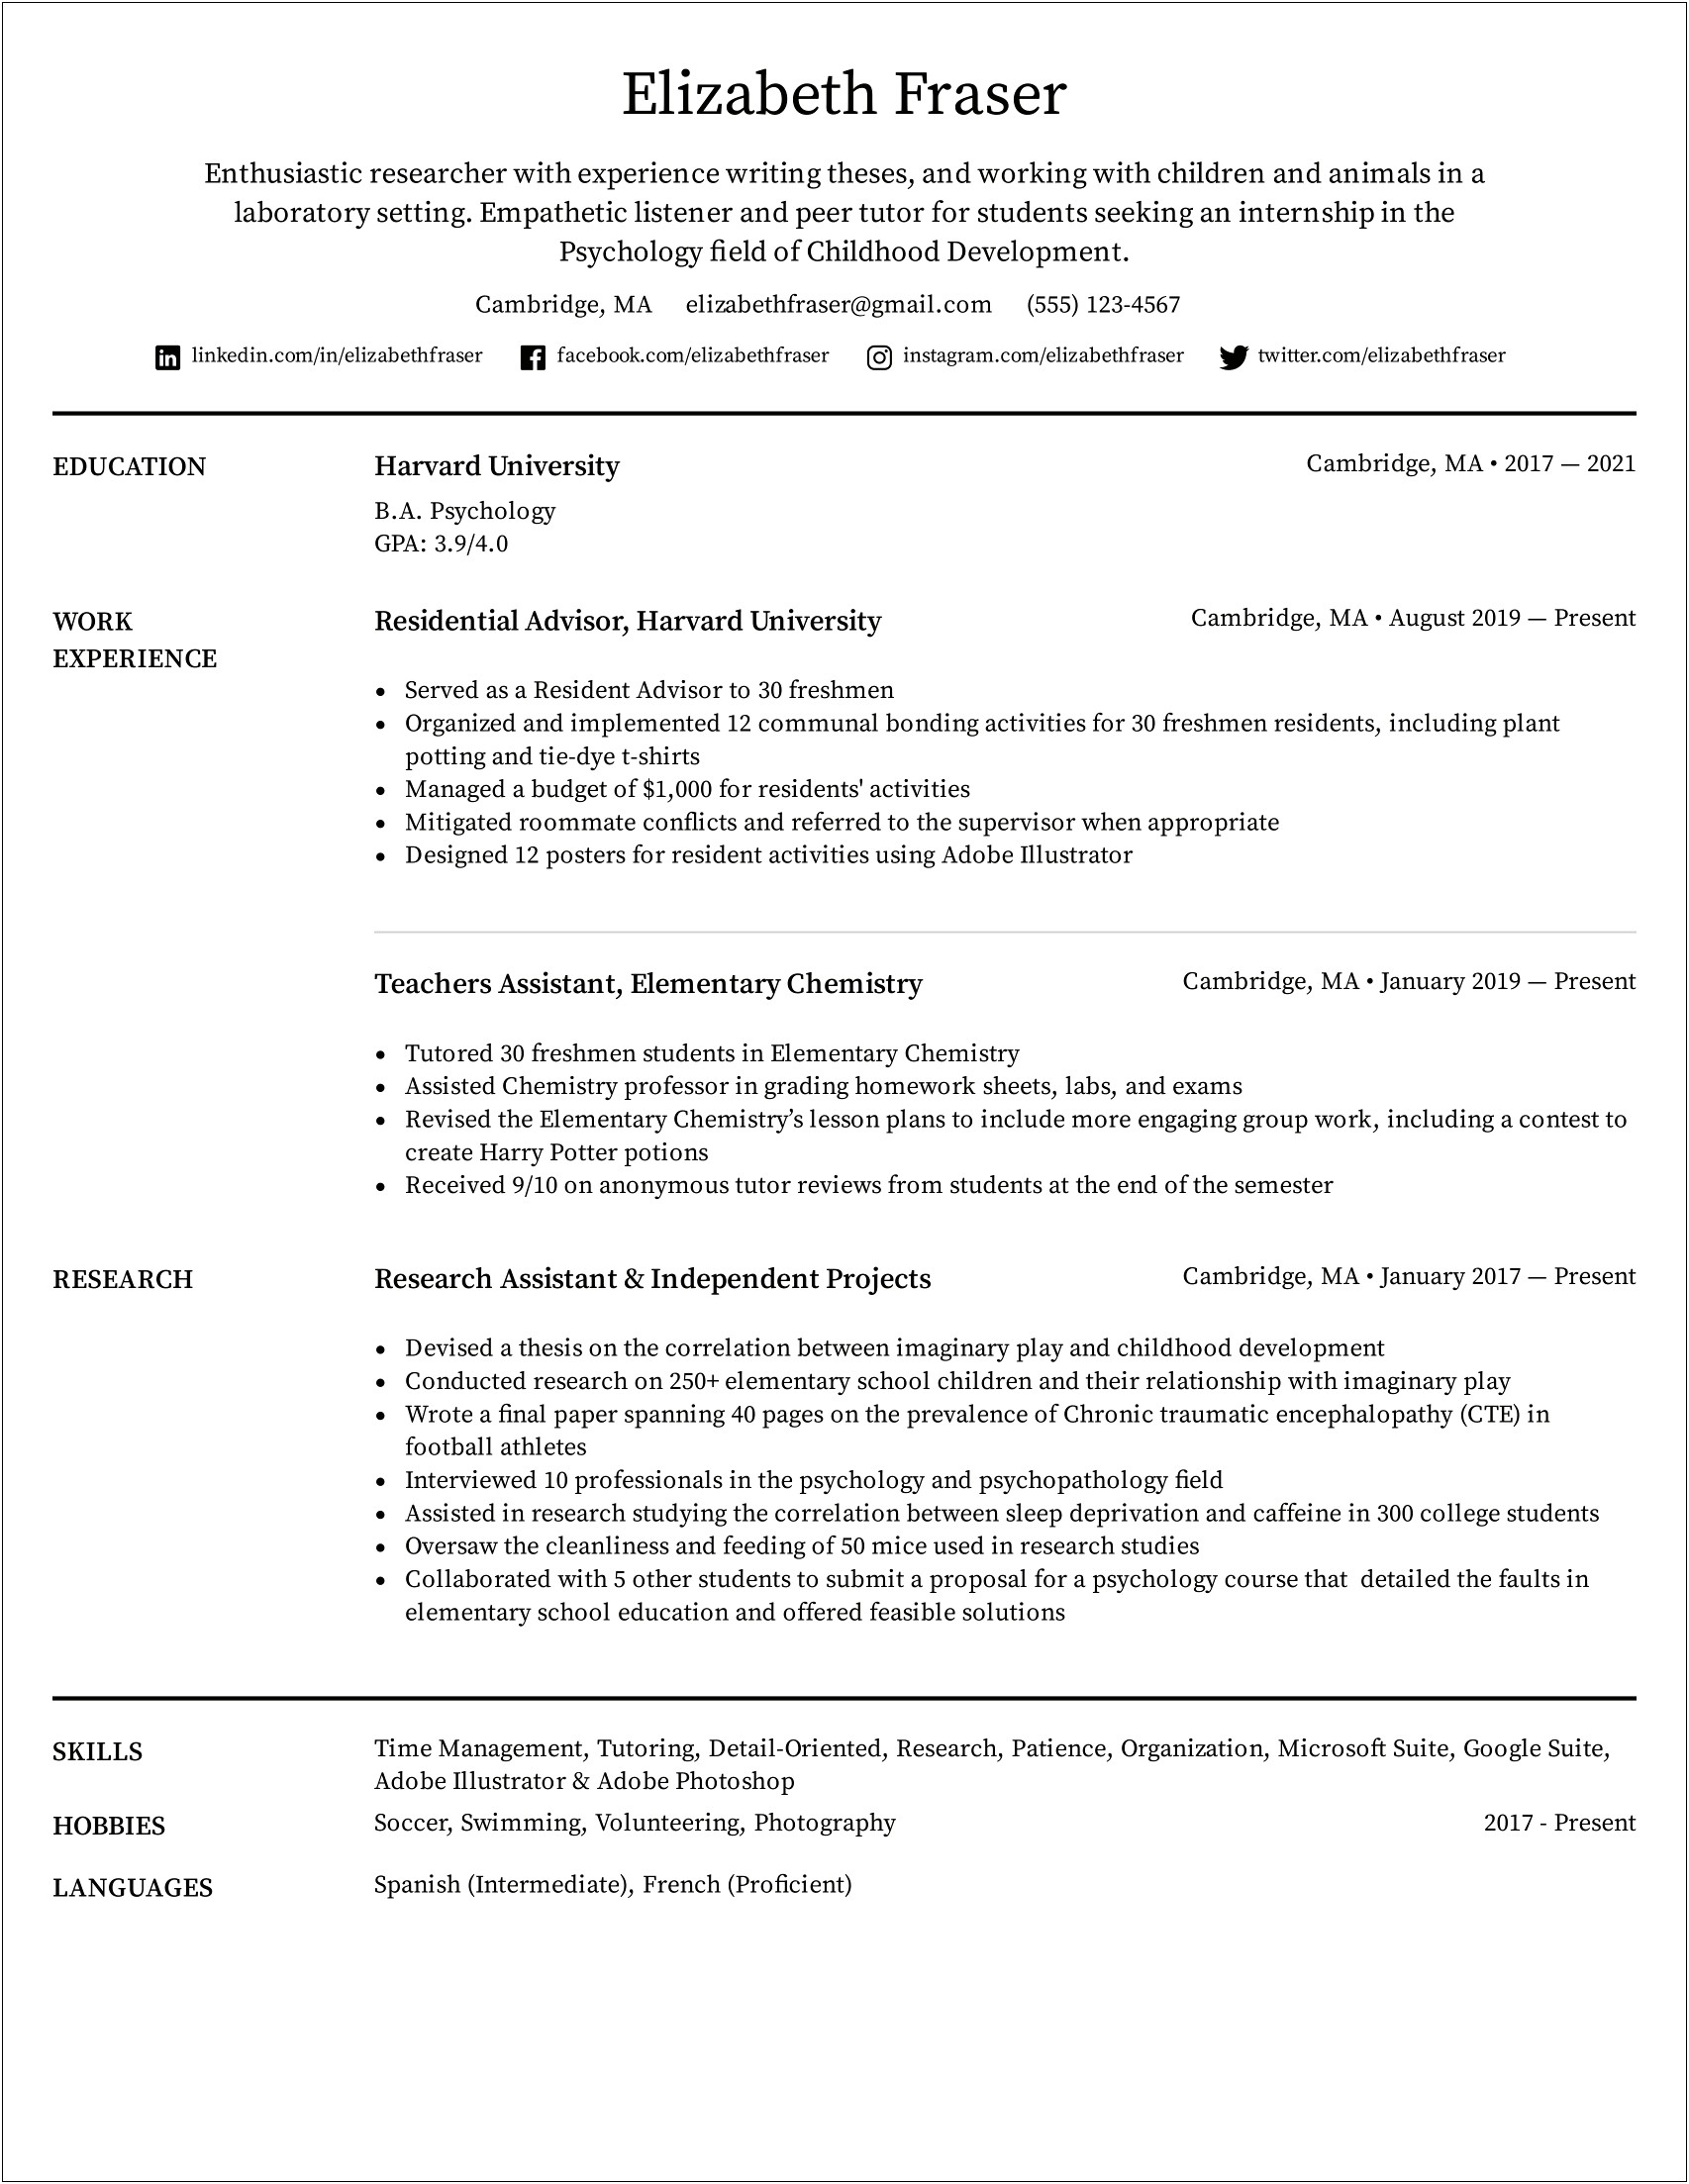 Sample Resume With Multiple Colleges